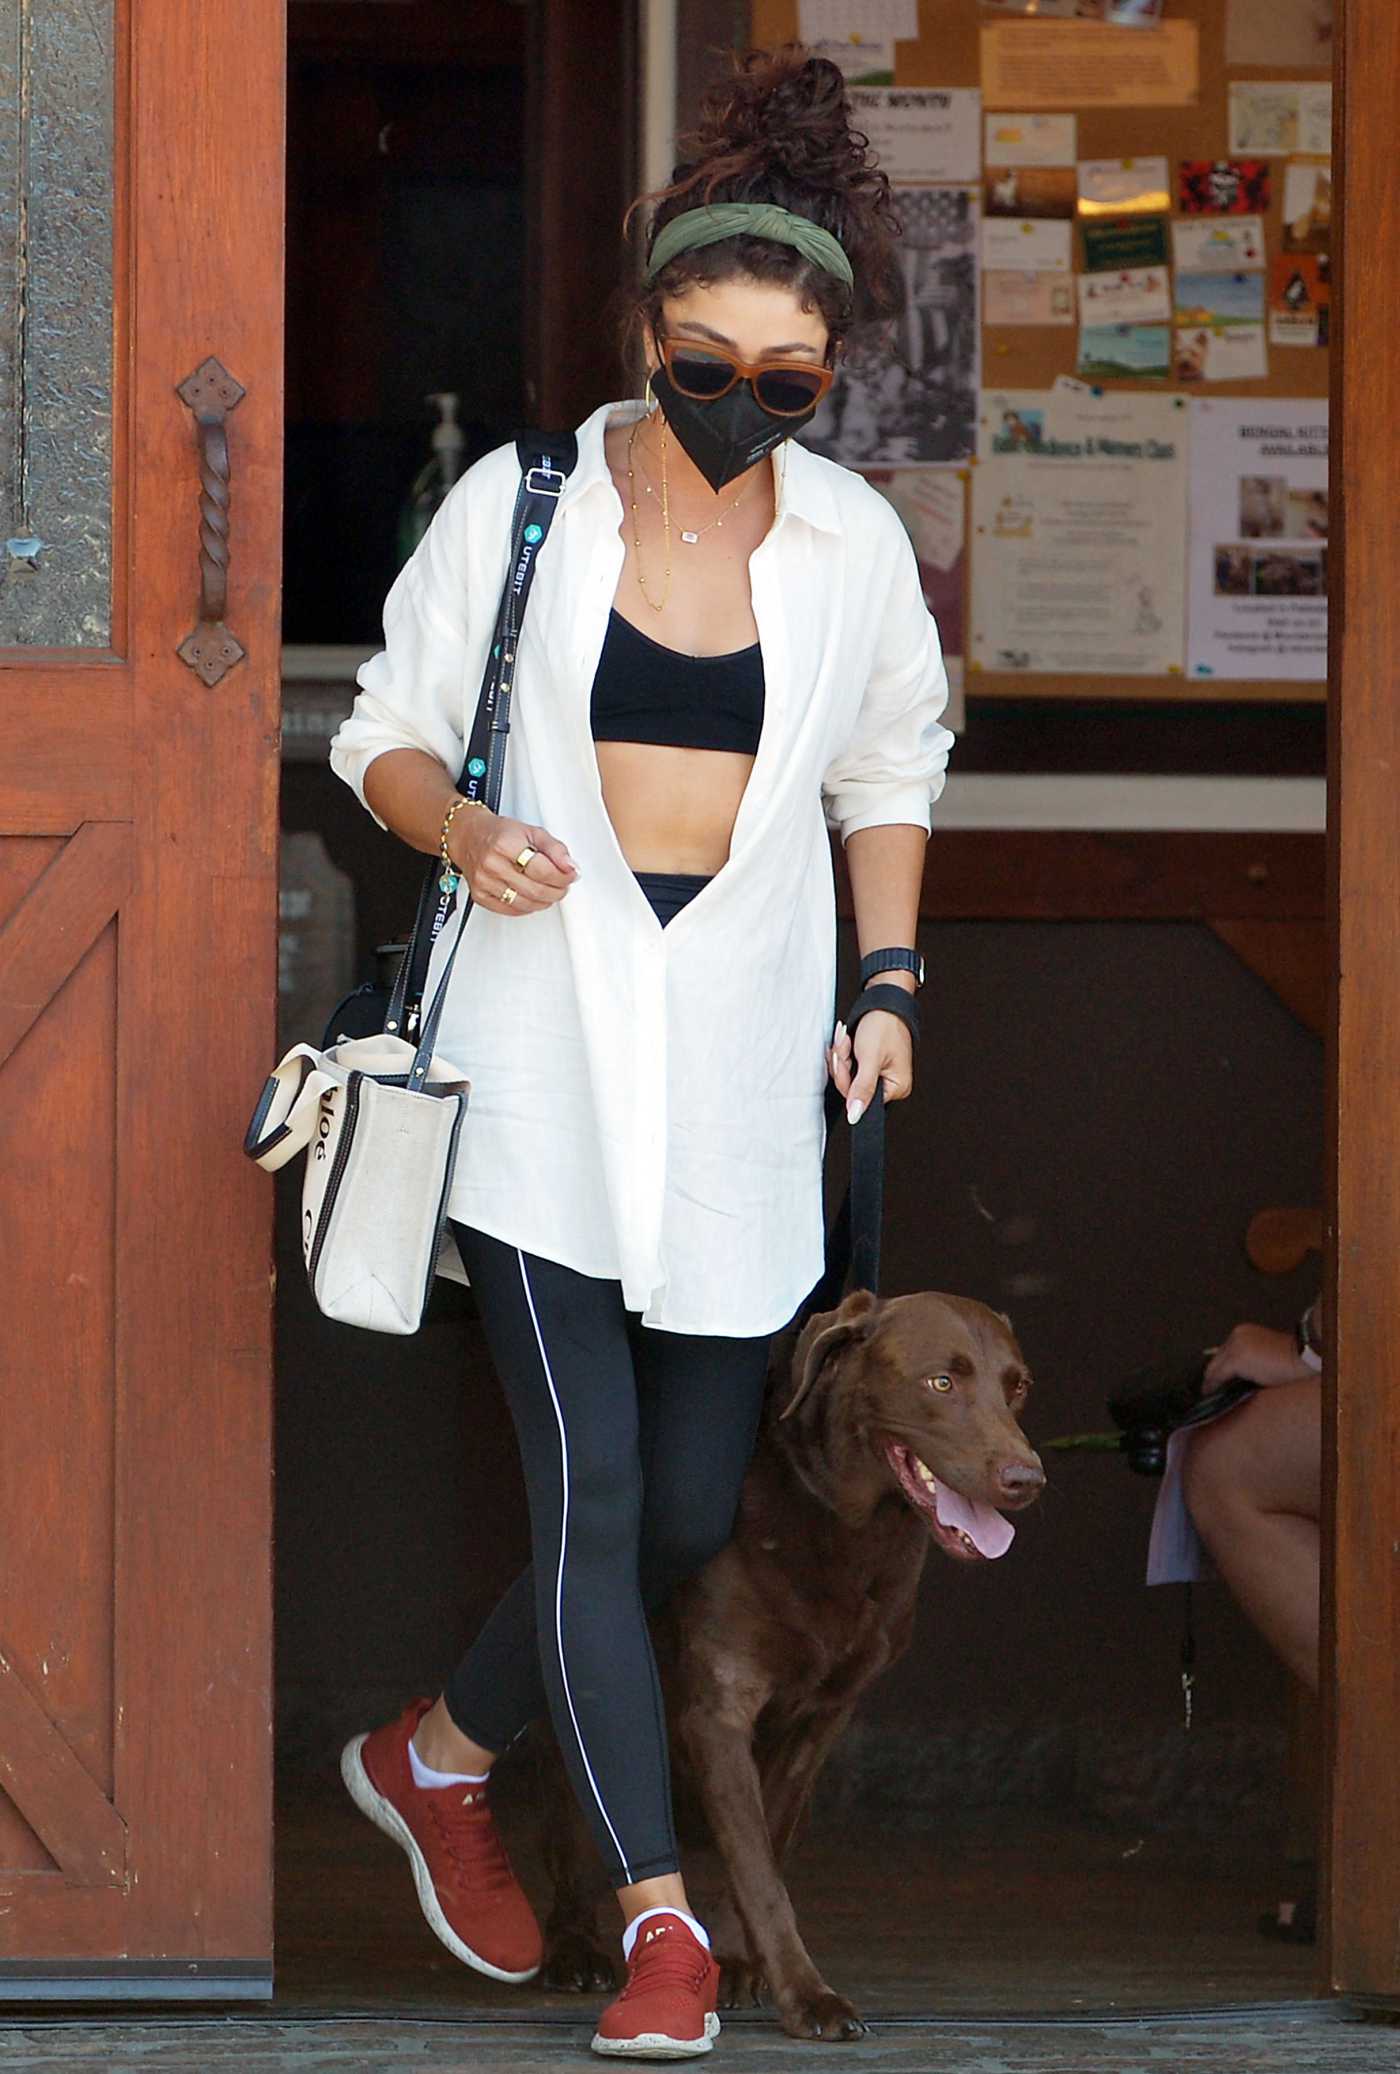 Sarah Hyland in a White Shirt Takes Her Dog to the Vet in Los Angeles 08/04/2022